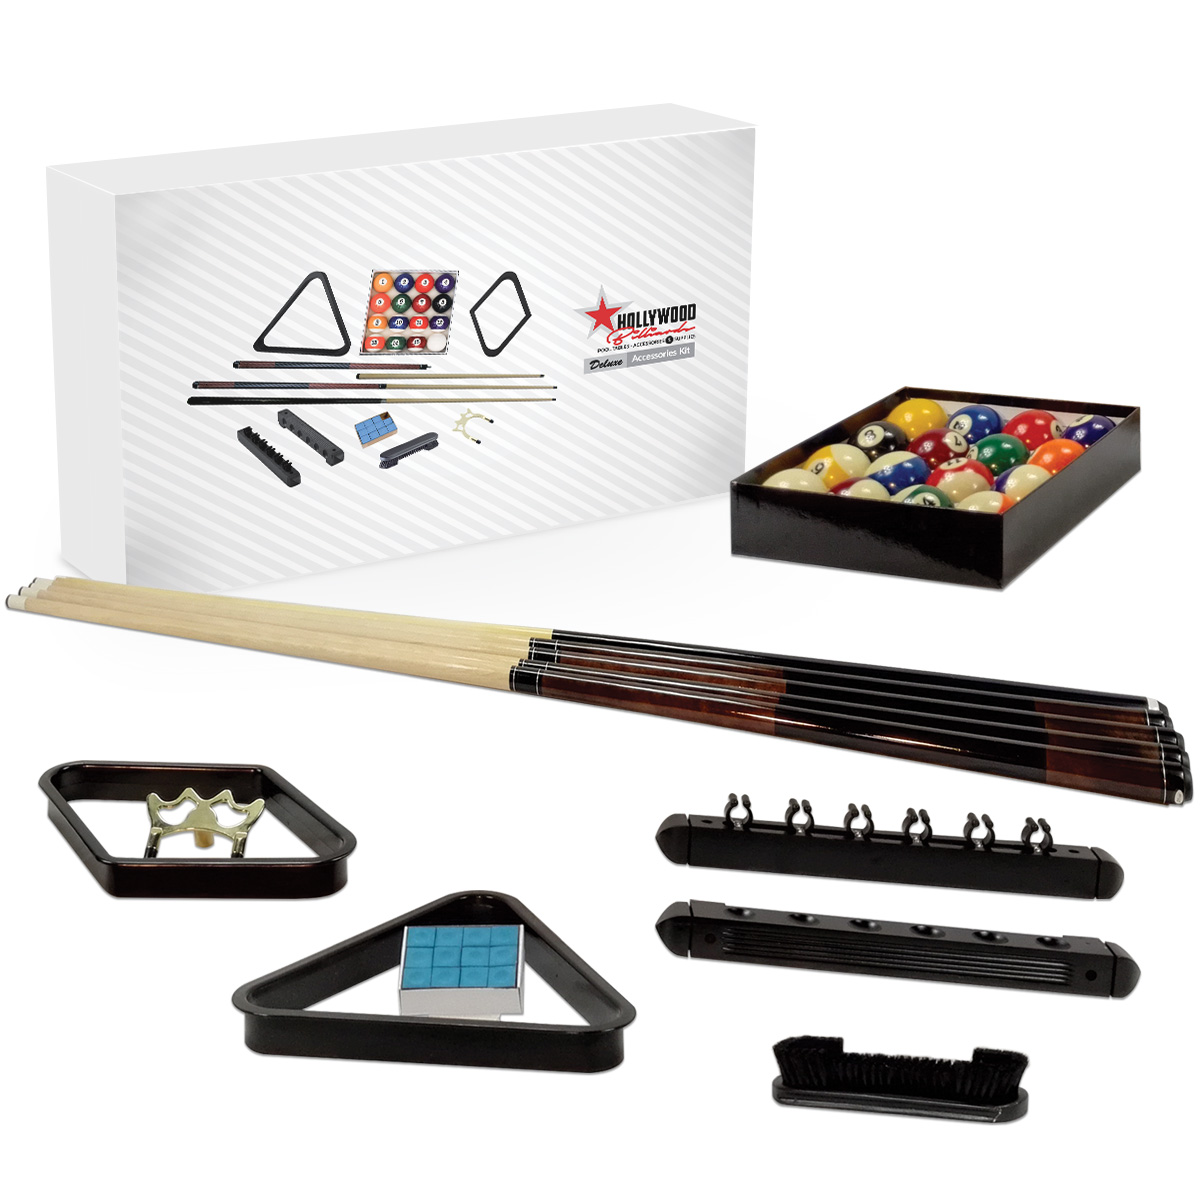 Deluxe Accessories Kit - Hollywood Billiards